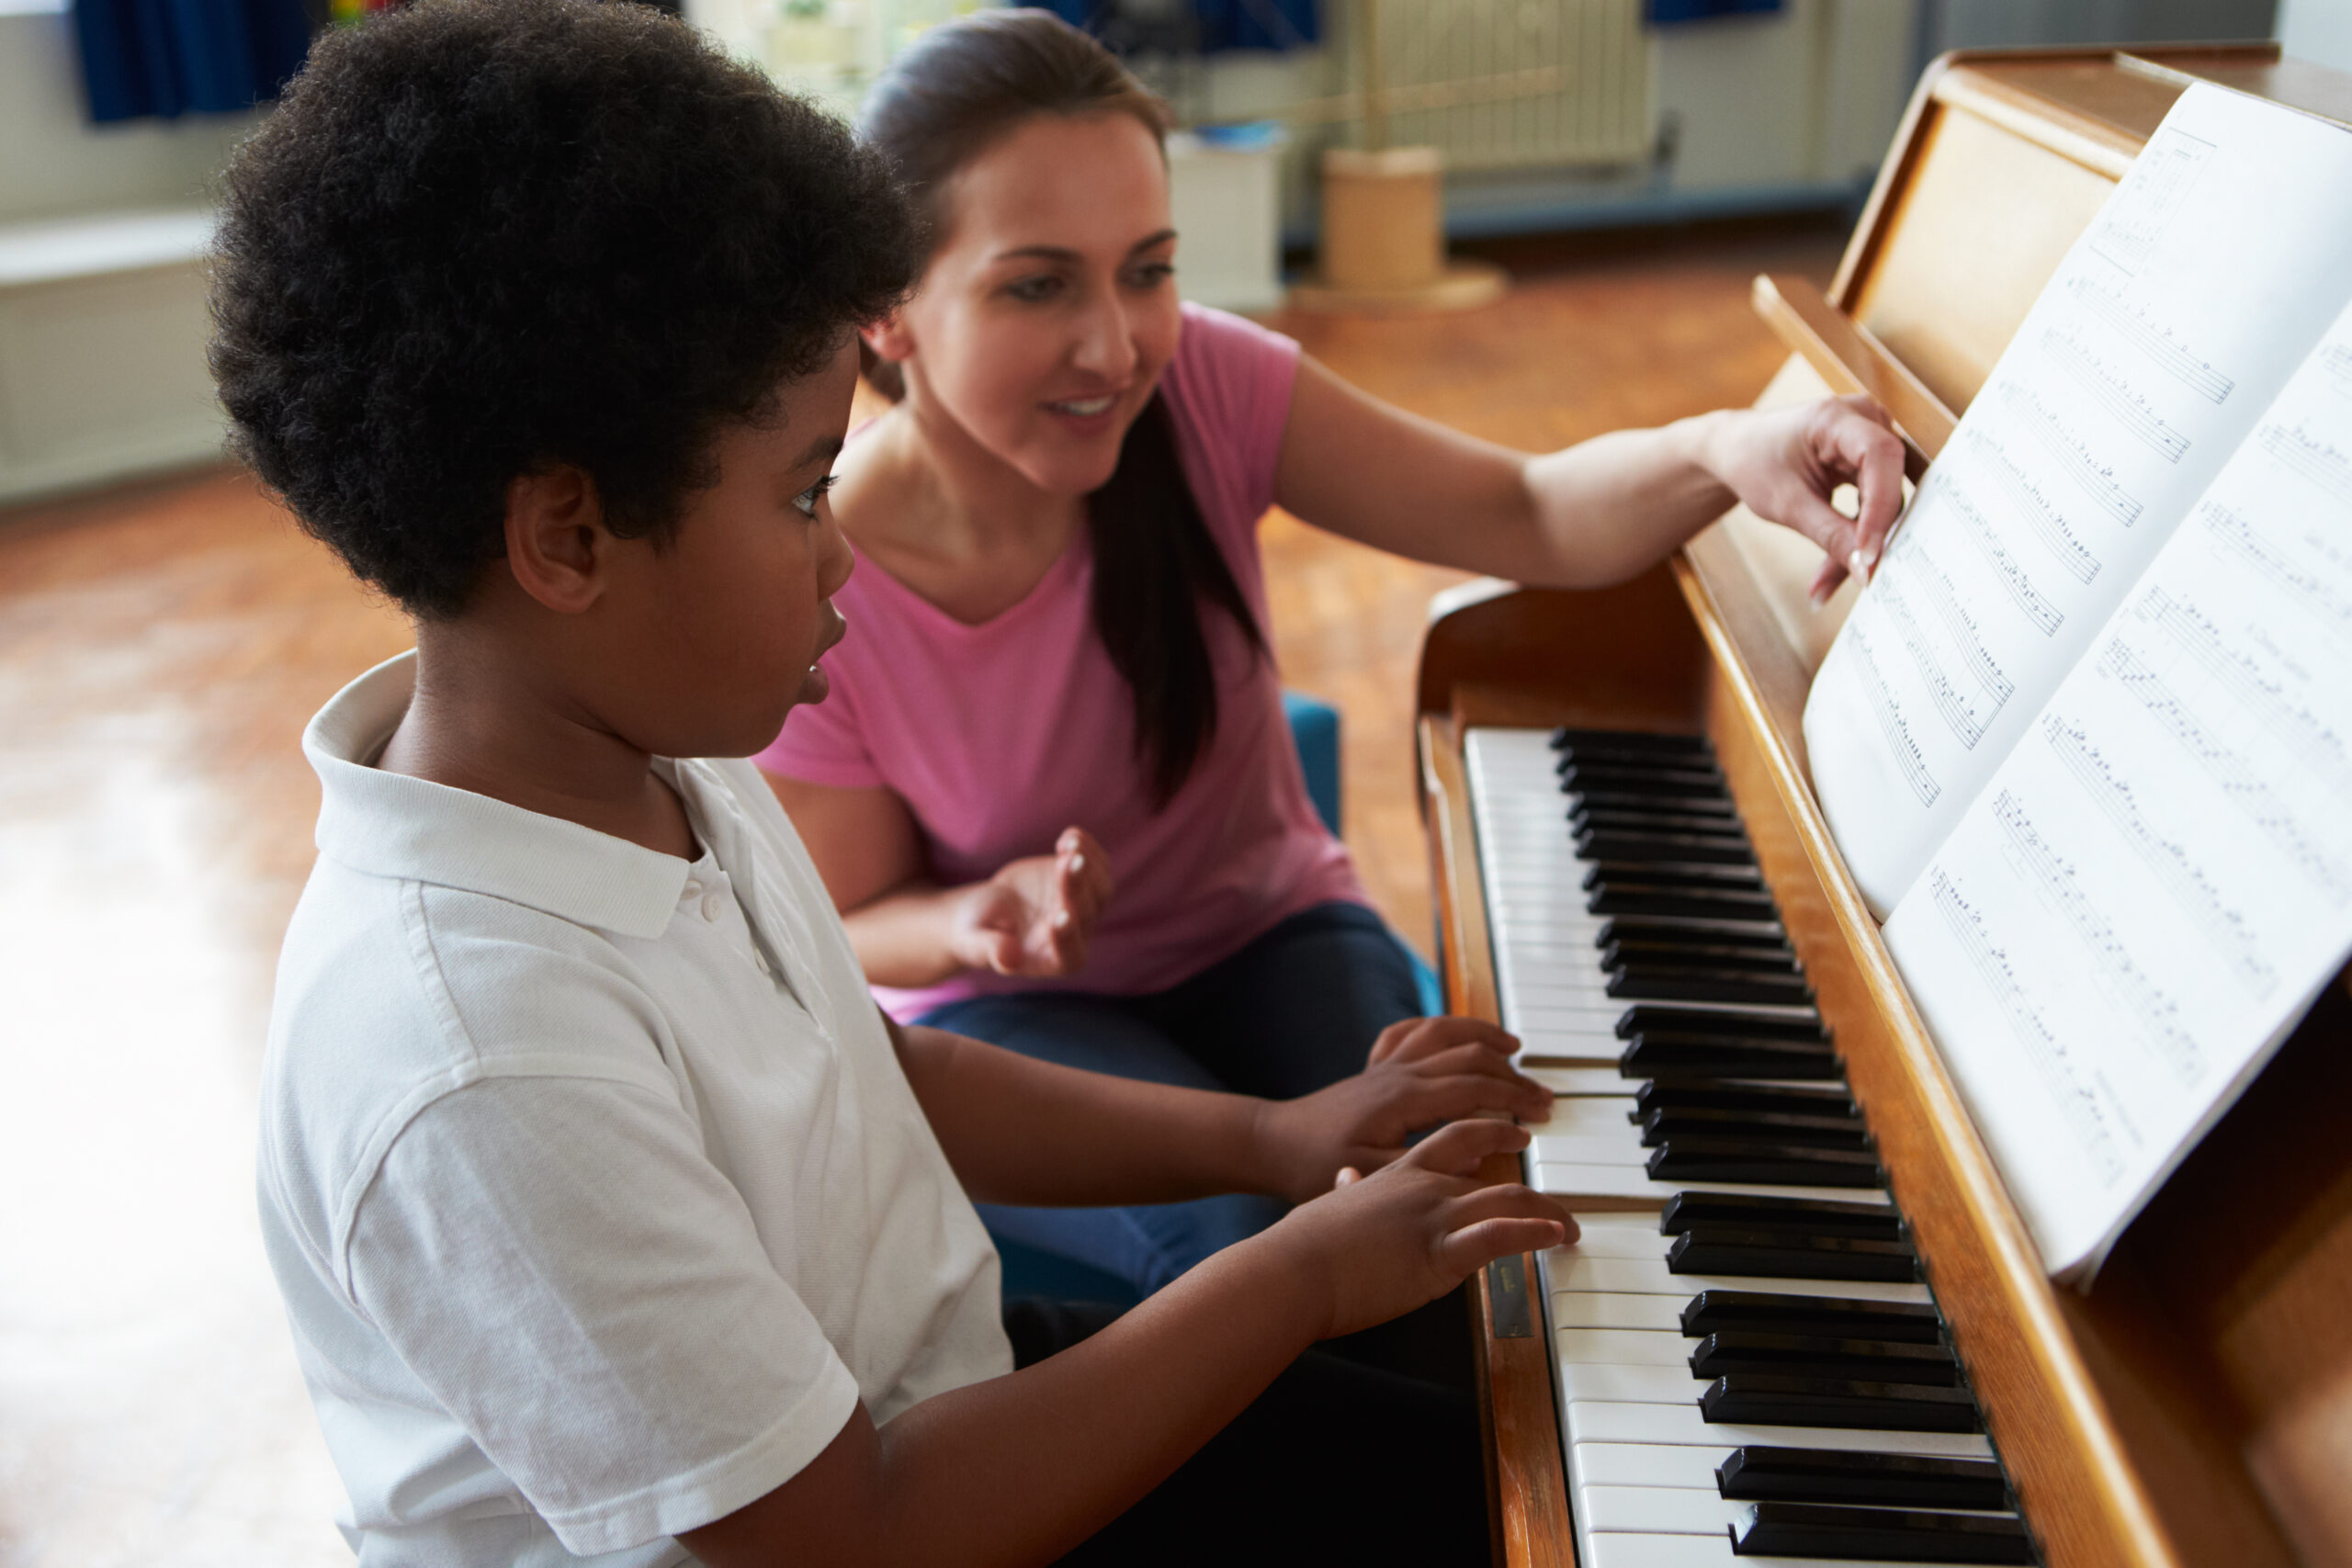 A photo of a female adult teaching a student, aged between 5 and 7, to play piano.